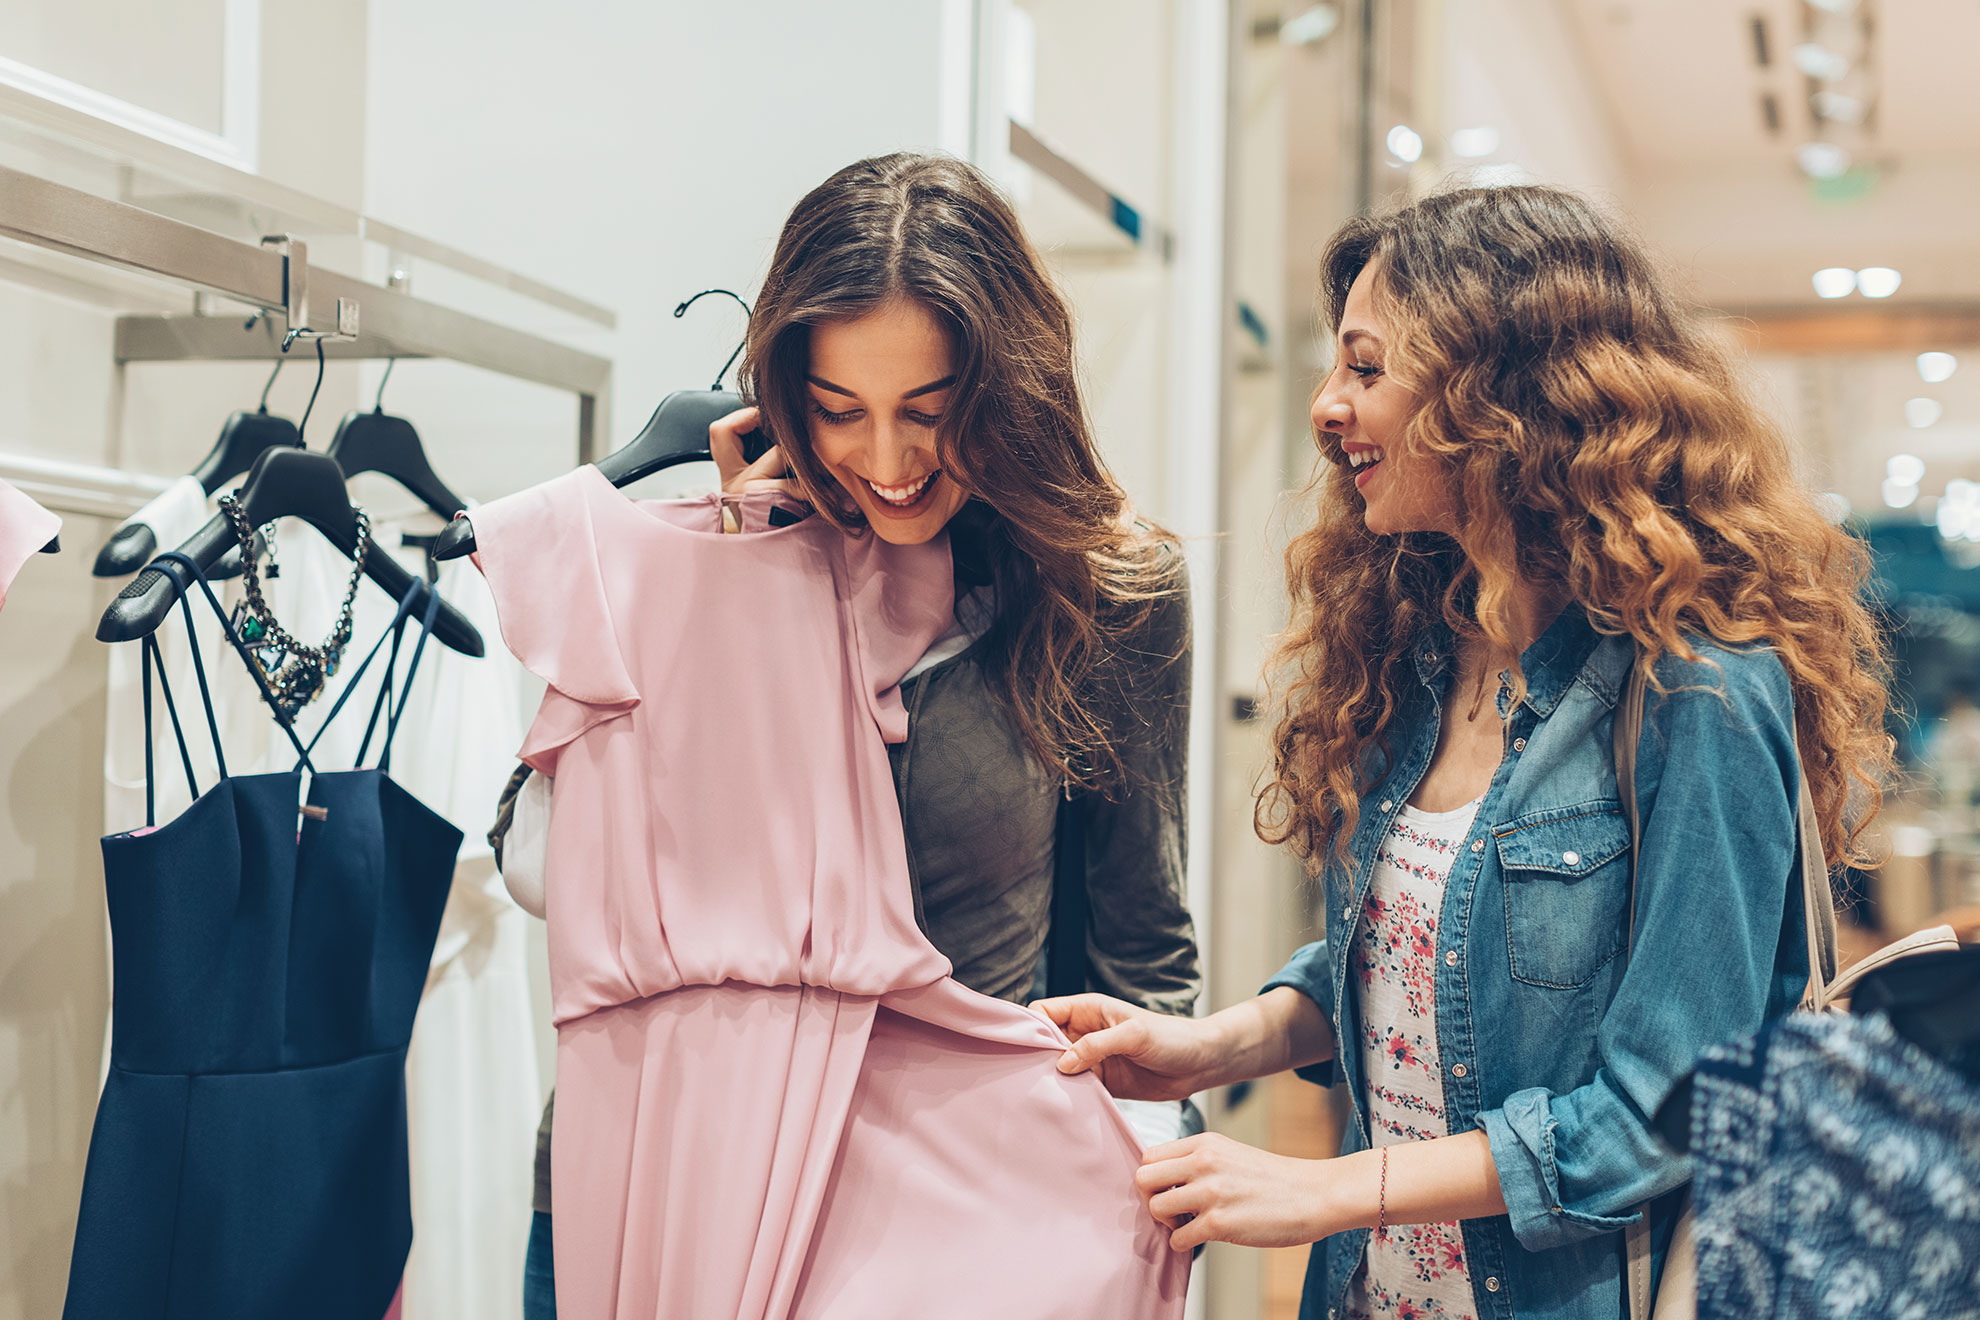 how to build customer loyalty in retail